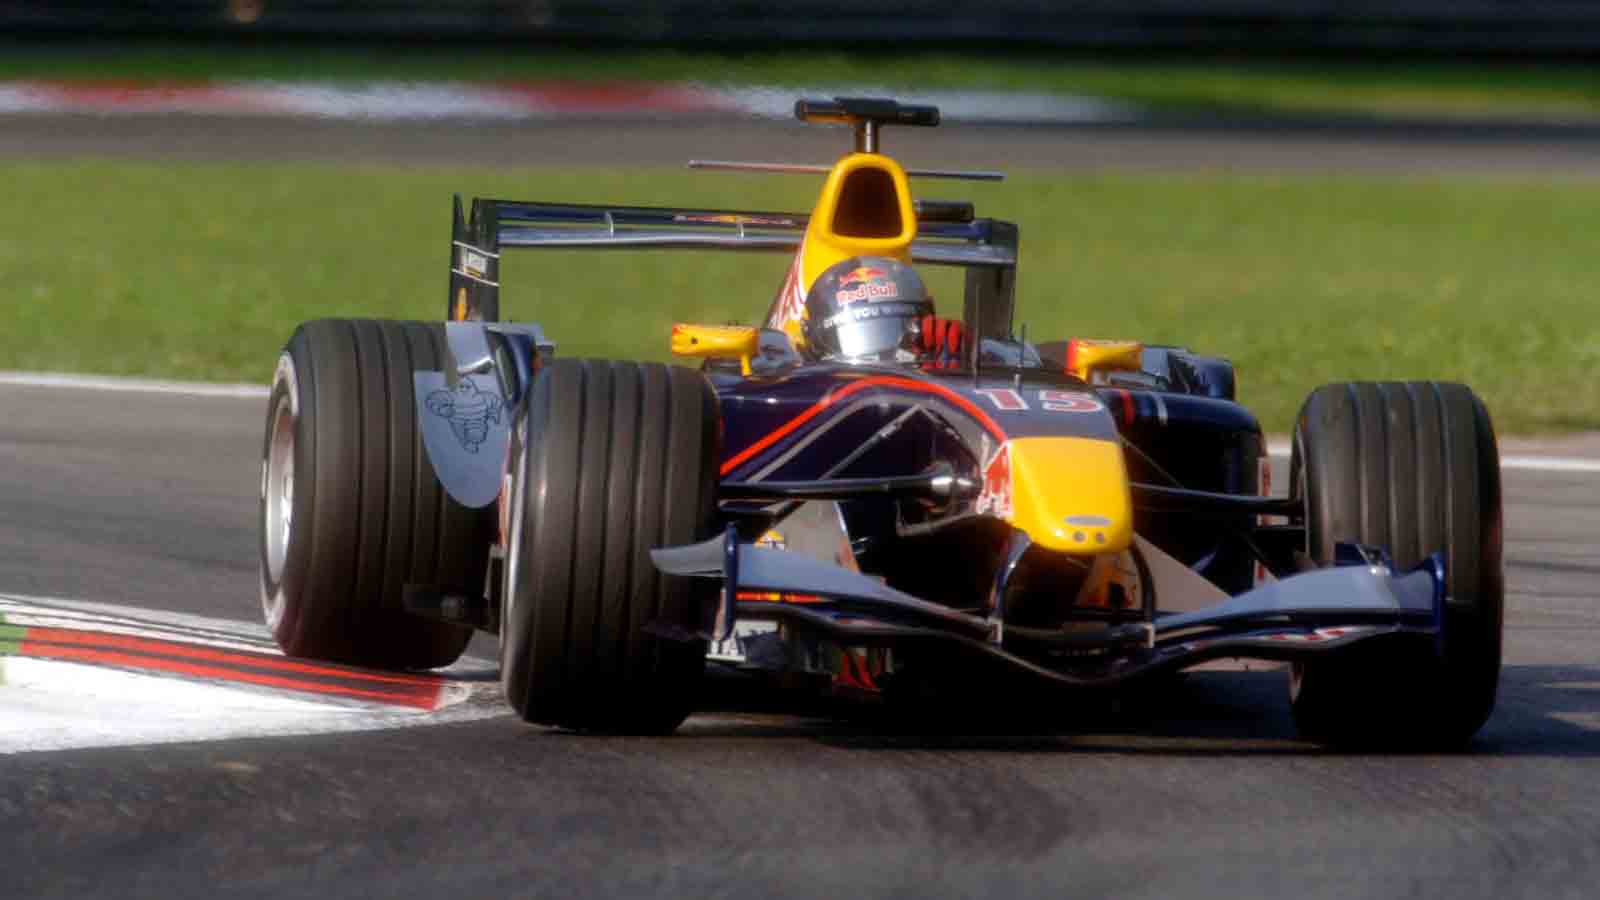 Christian Klien drives for Red Bull at Monza. Italy 2005.